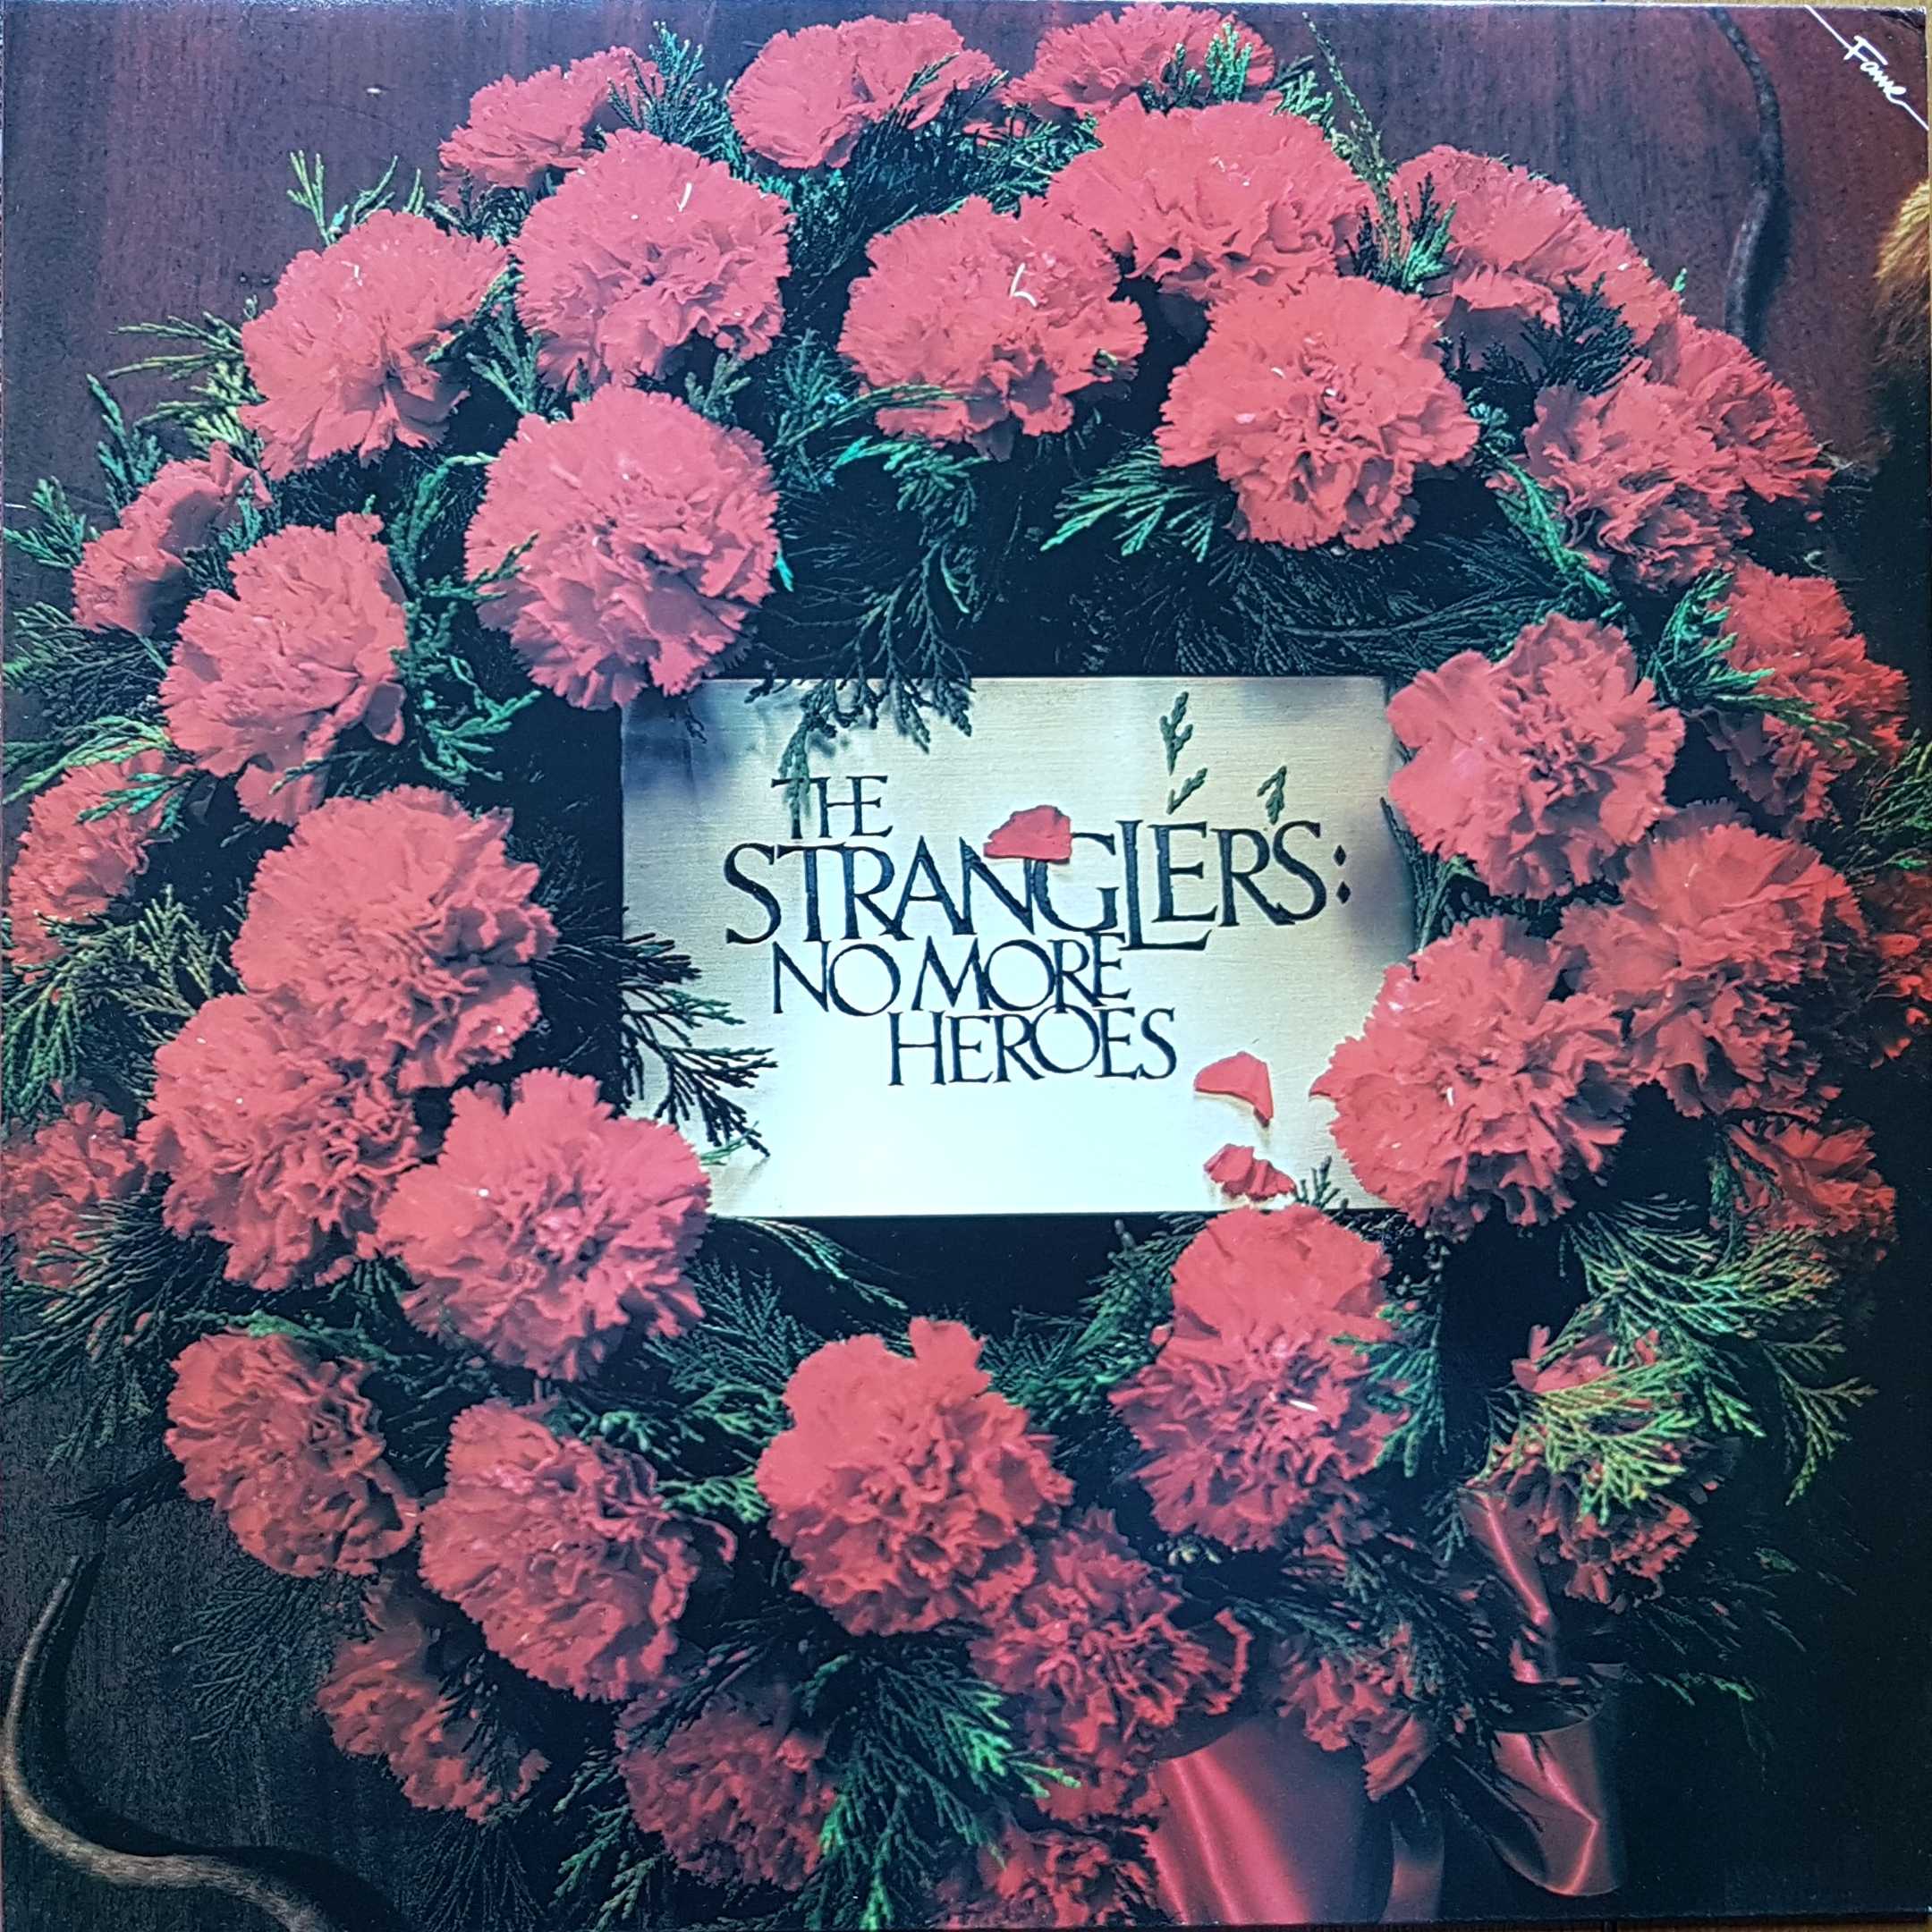 Picture of FA 3190 No more heroes by artist The Stranglers  from The Stranglers albums